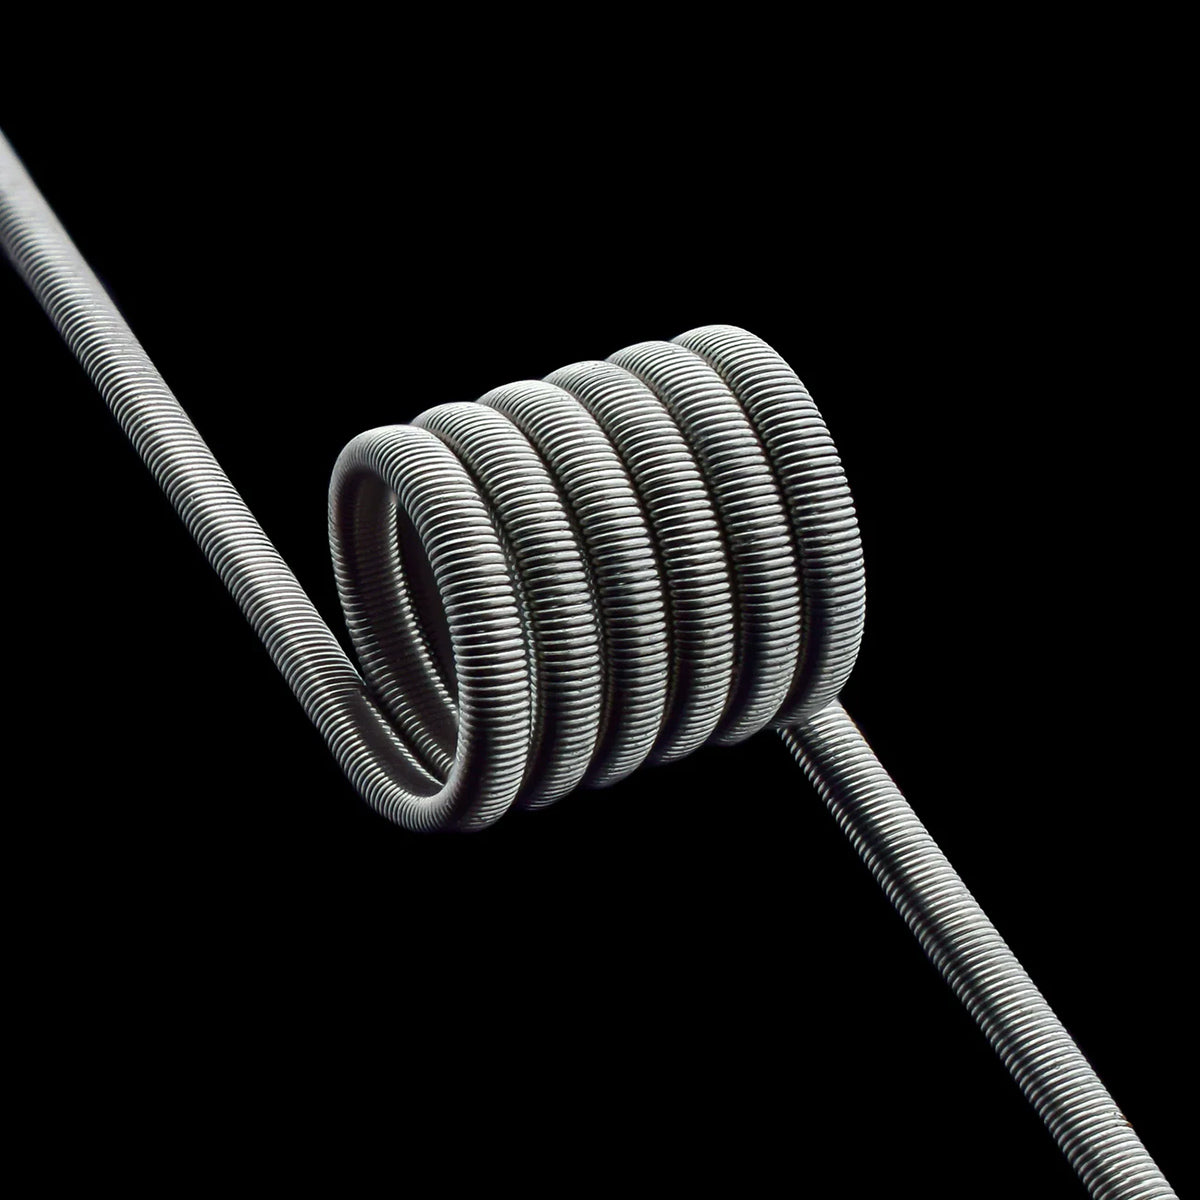 0.72 MTL Fused Clapton Coils by Coils by Scott